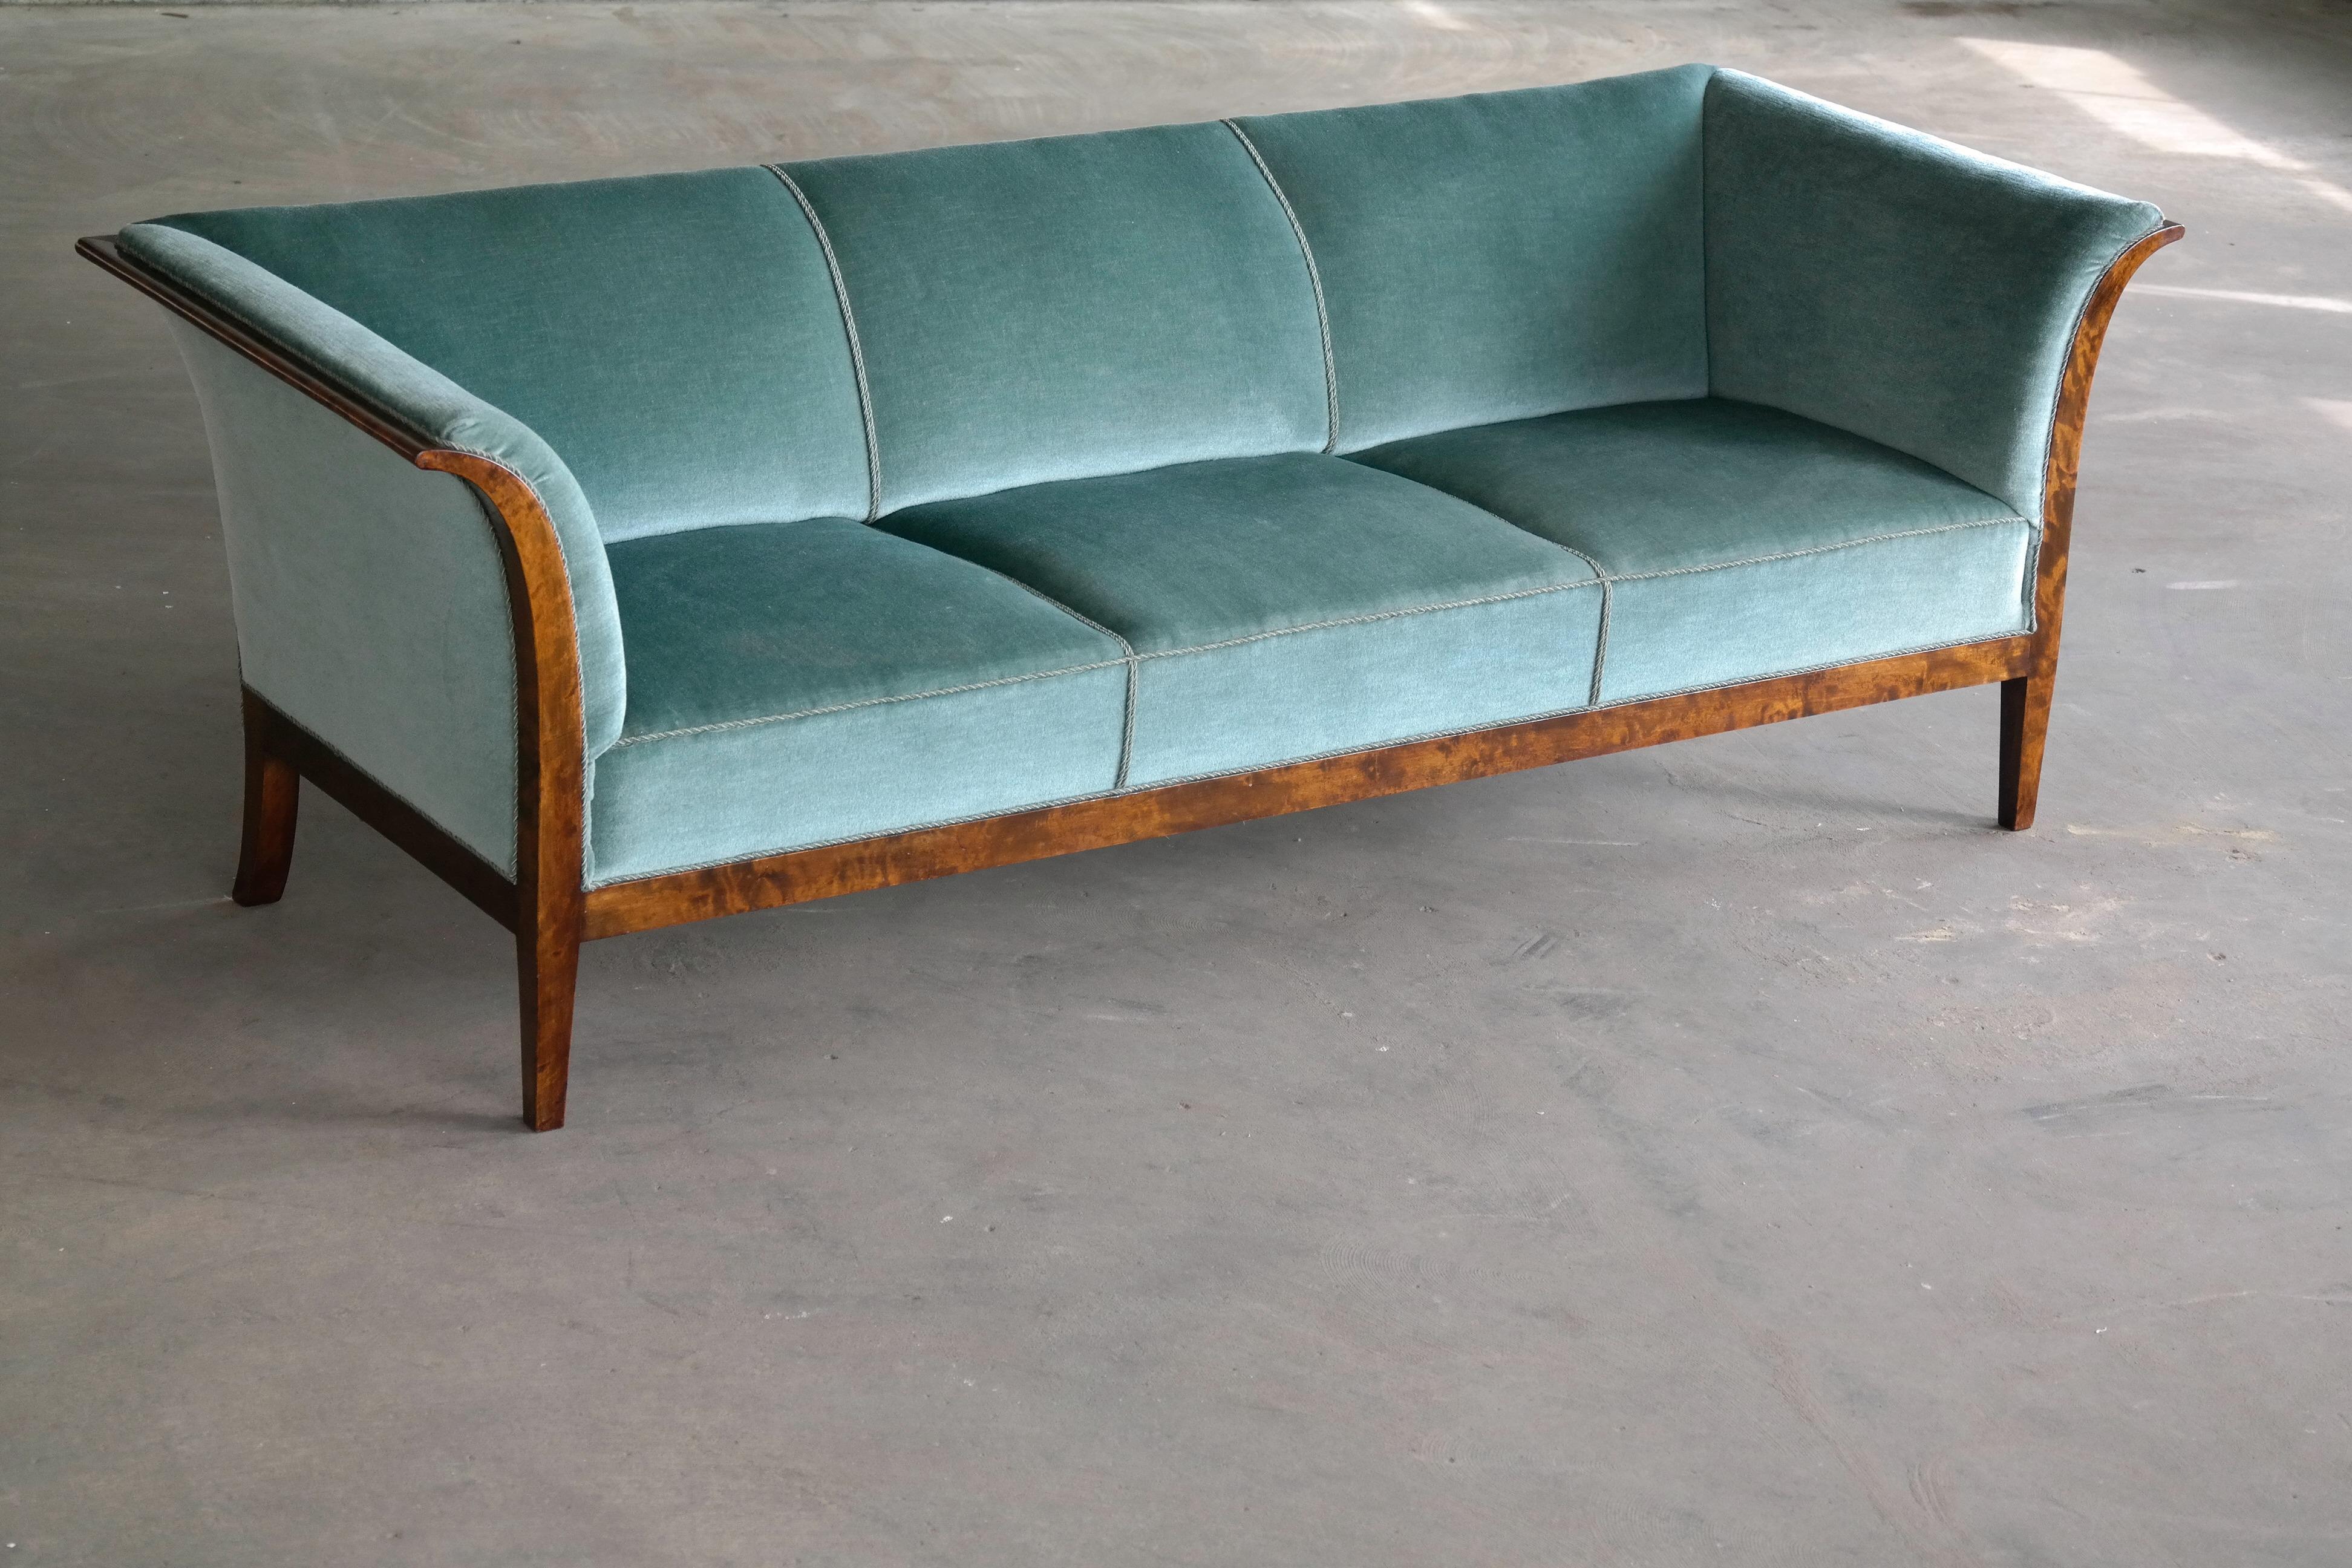 Frits Henningsen Classic Sofa in Flamed Birchwood with Original 1938 Invoice 4